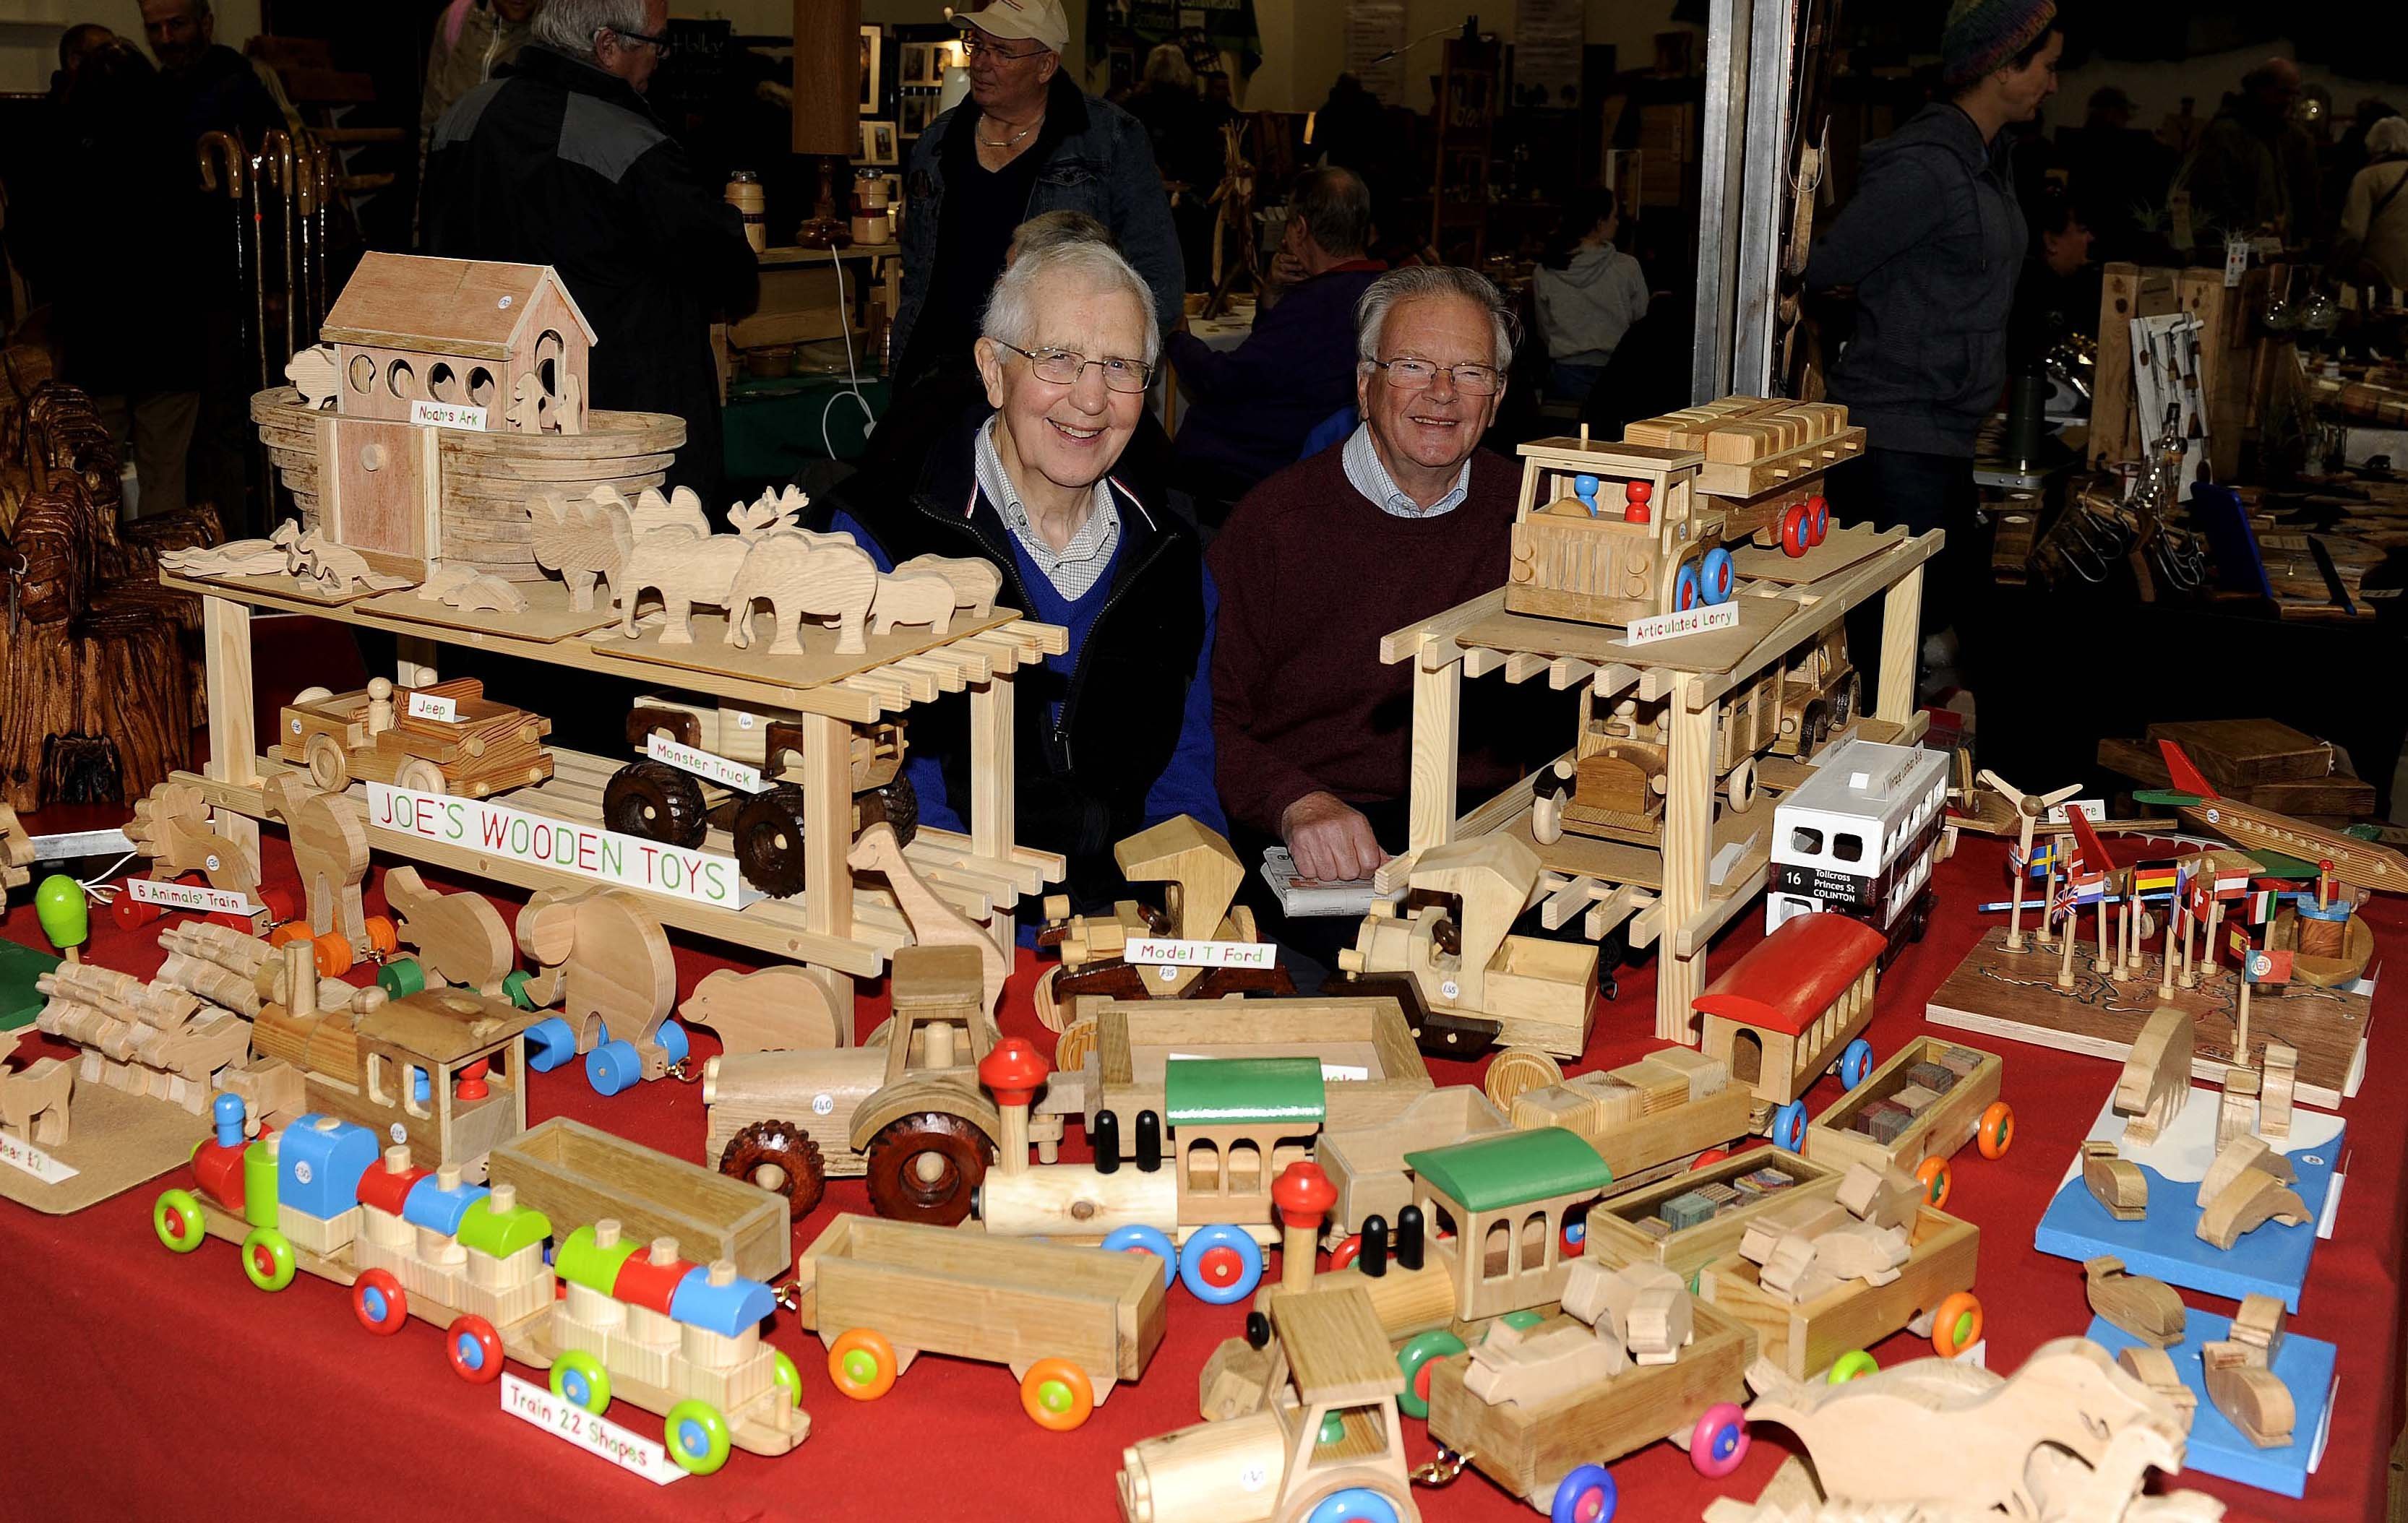 On Joe's wooden toys stall is Stanley Cartmell and Chris Beaumont (Joe was Stanleys dad)  at the Tweed Valley Forest Festival in Peebles.